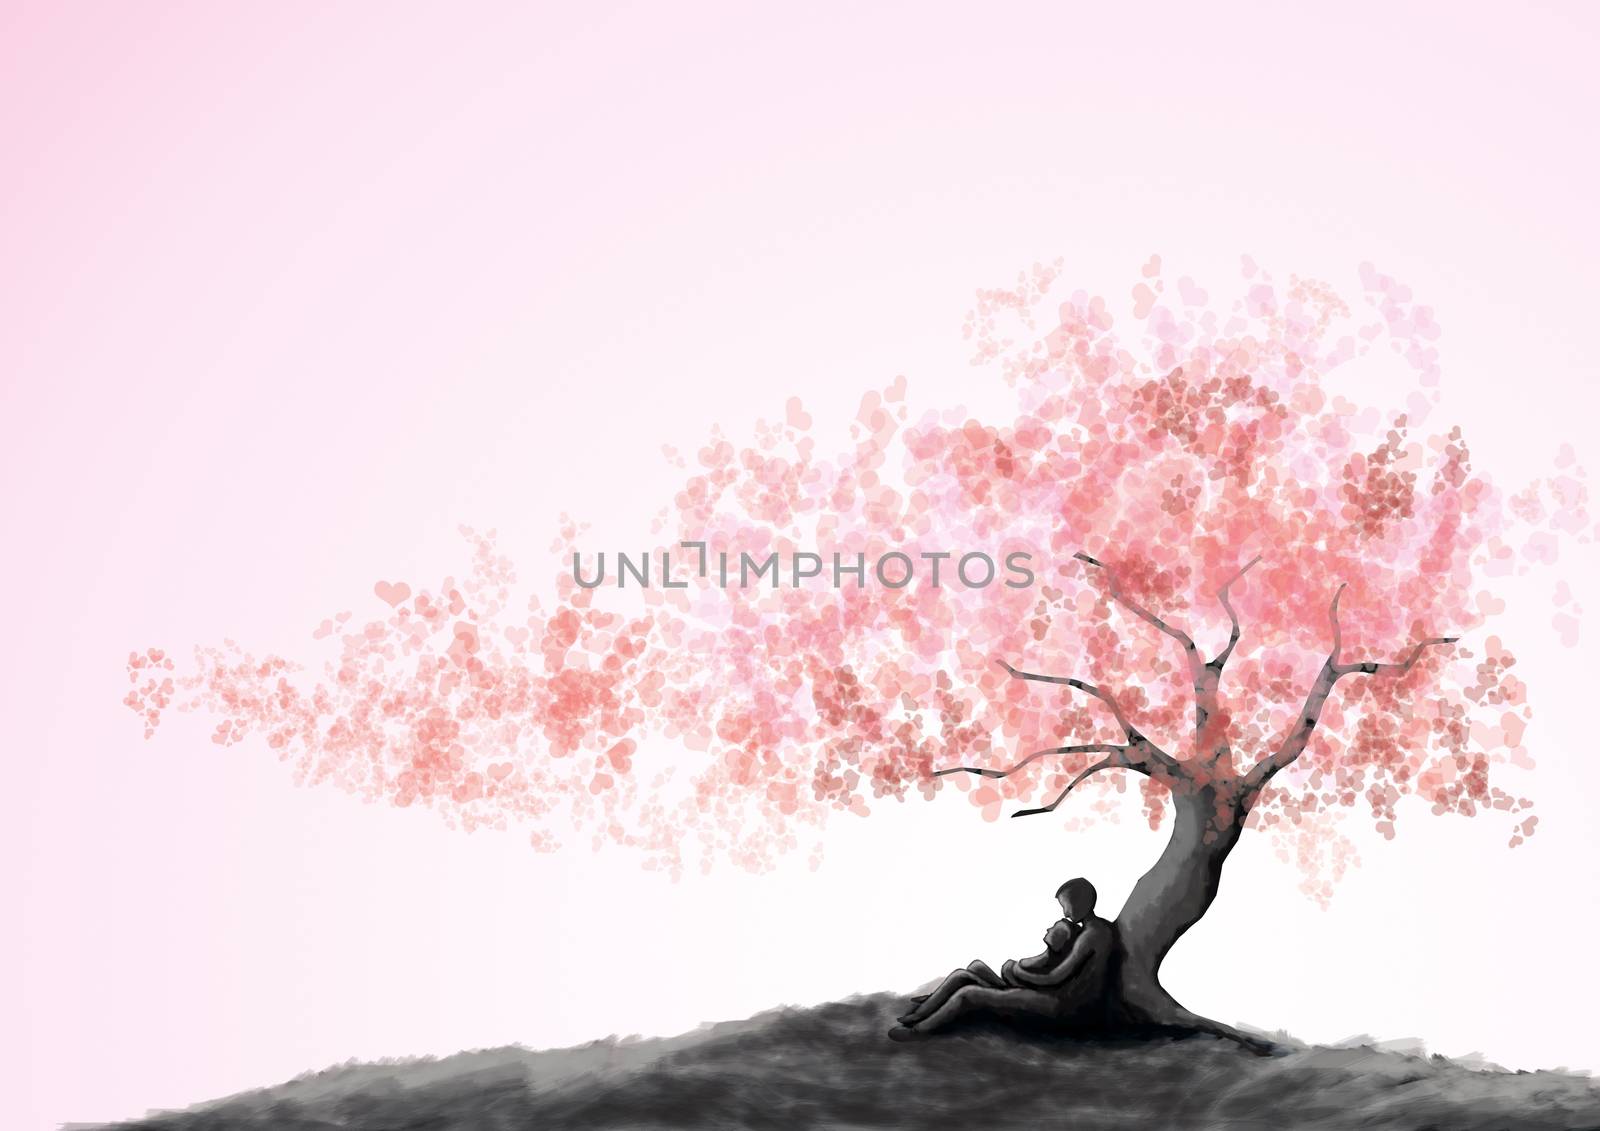 Dating couple under a love tree, painting style. by asiandelight